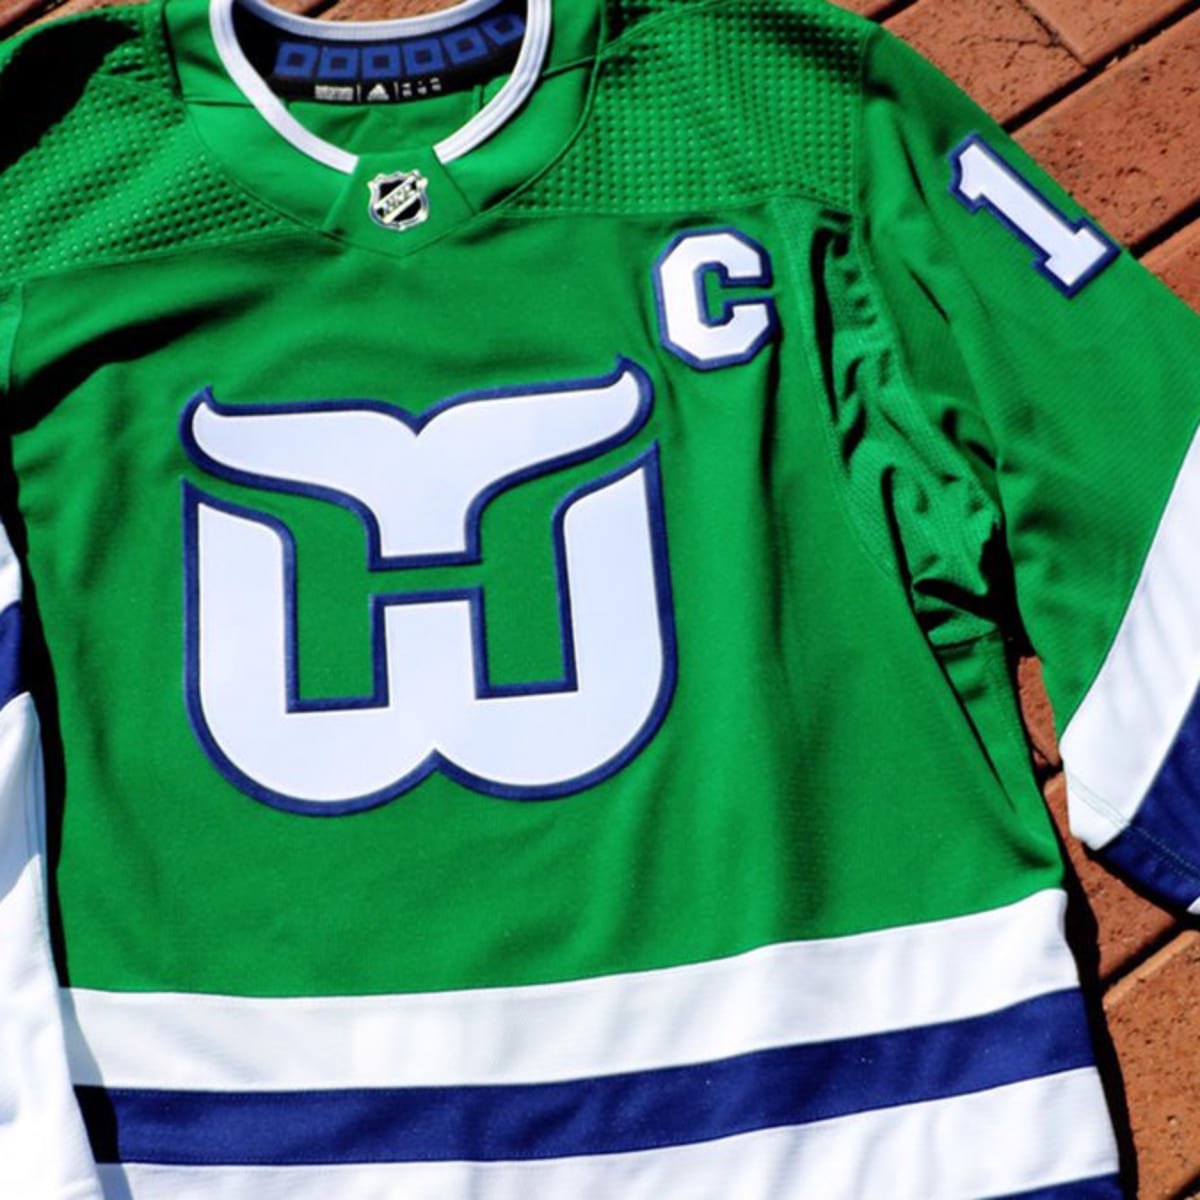 Carolina Hurricanes Wore Hartford Whalers Throwback Uniforms, and NHL Fans  Loved It - Sports Illustrated